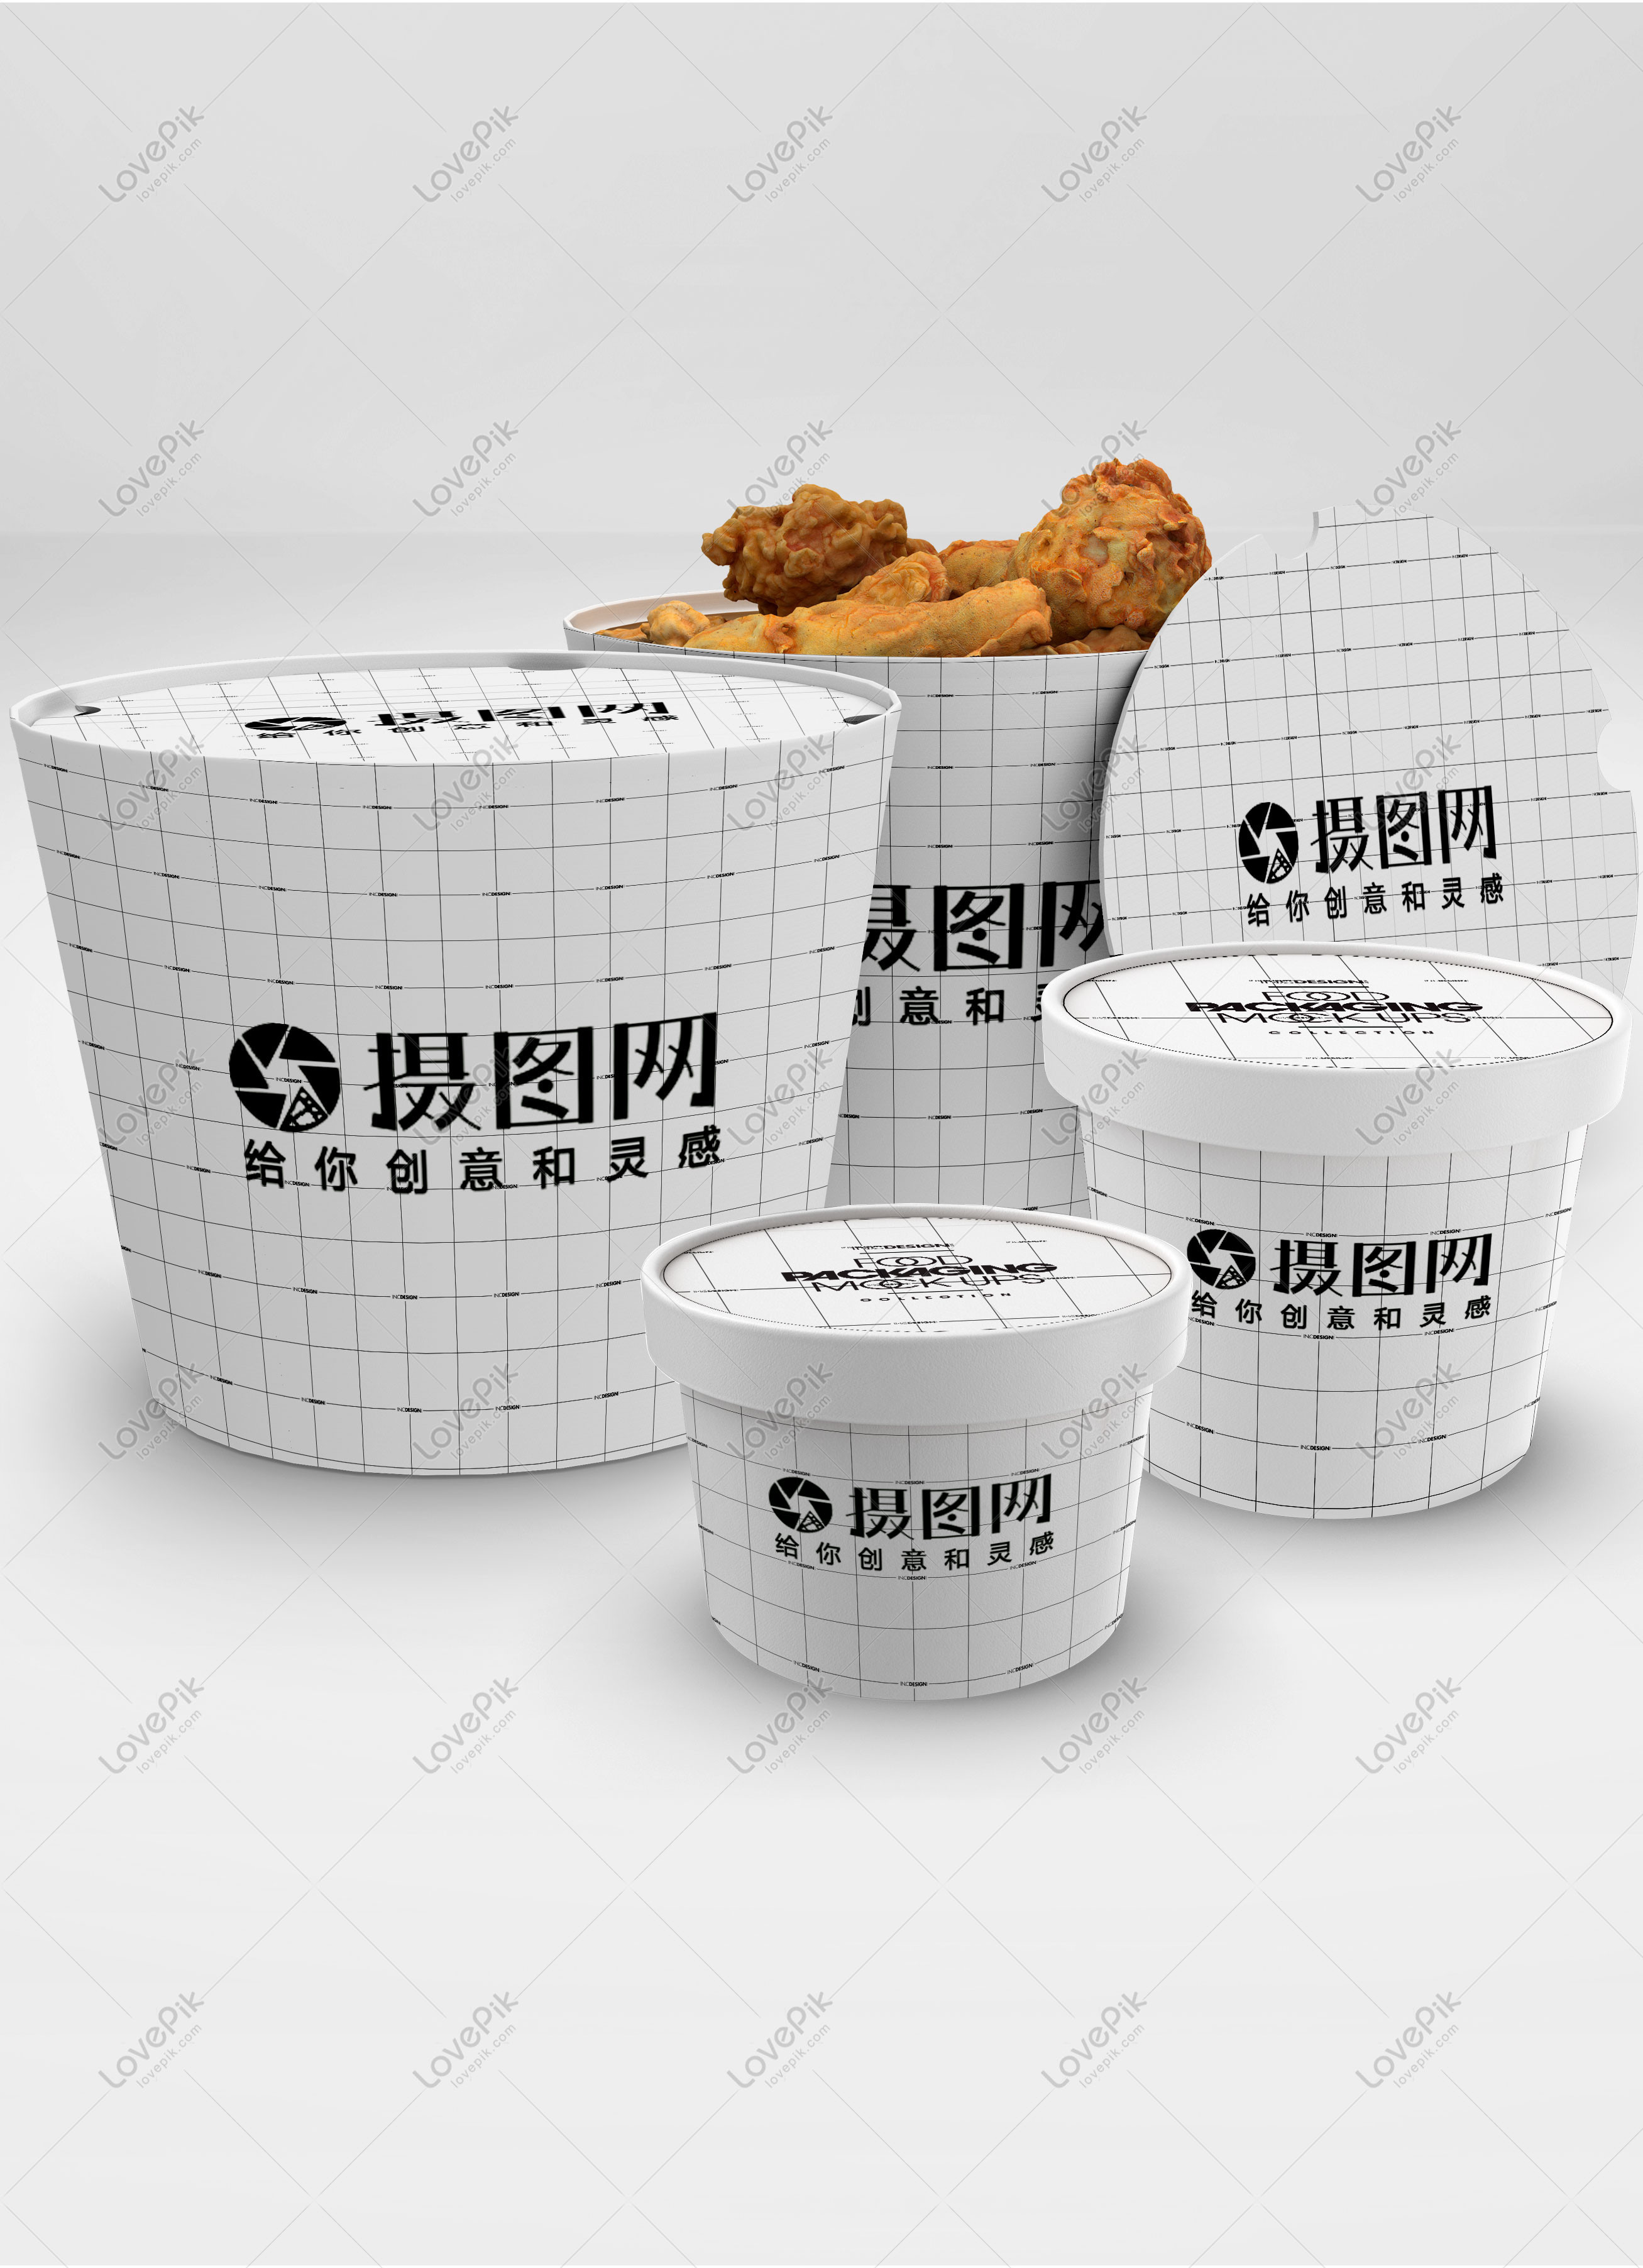 Download Fast Food Box Packaging Mockup Template Image Picture Free Download 400724843 Lovepik Com